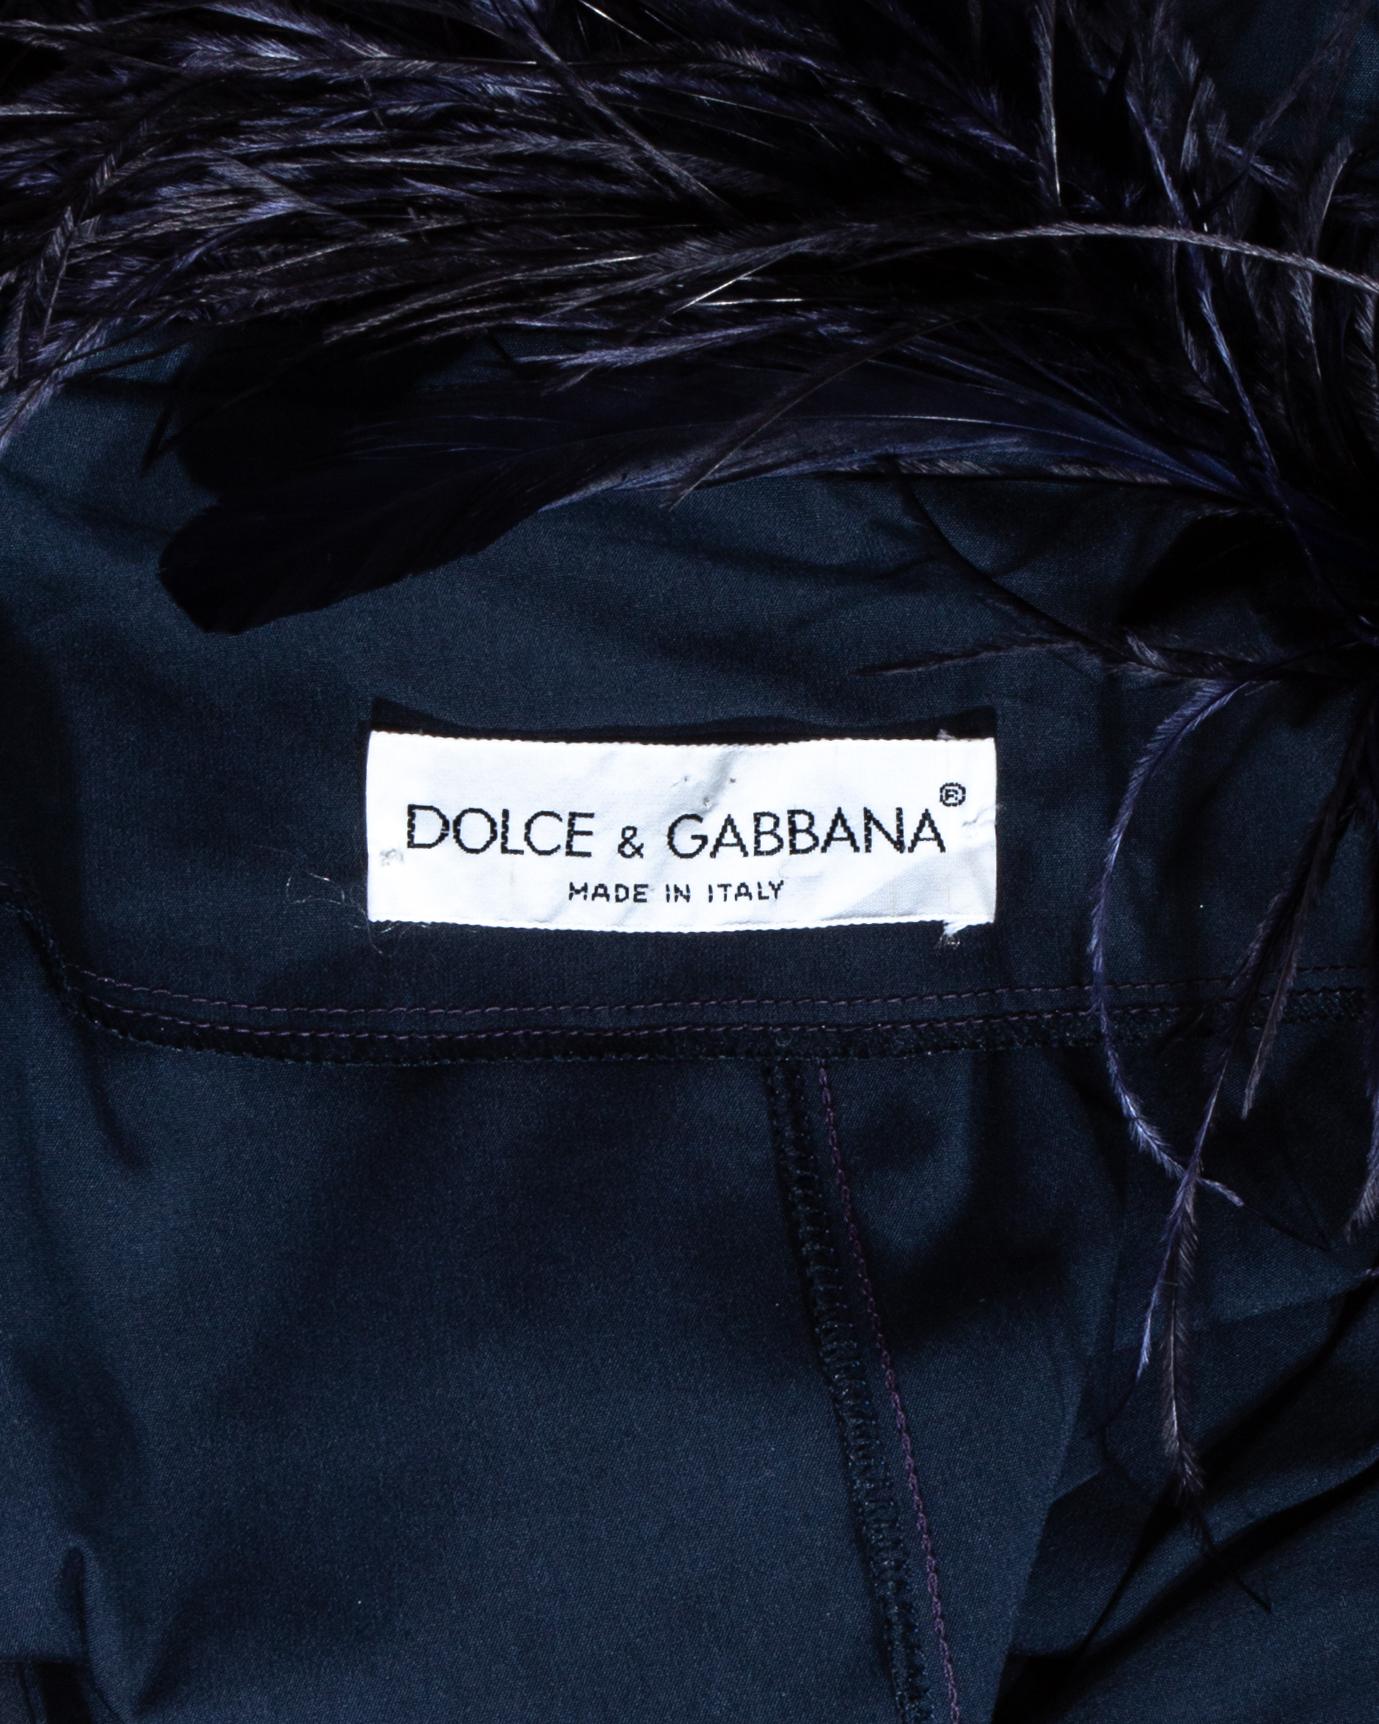 Dolce & Gabbana navy feathered pant suit, fw 1990 For Sale 4